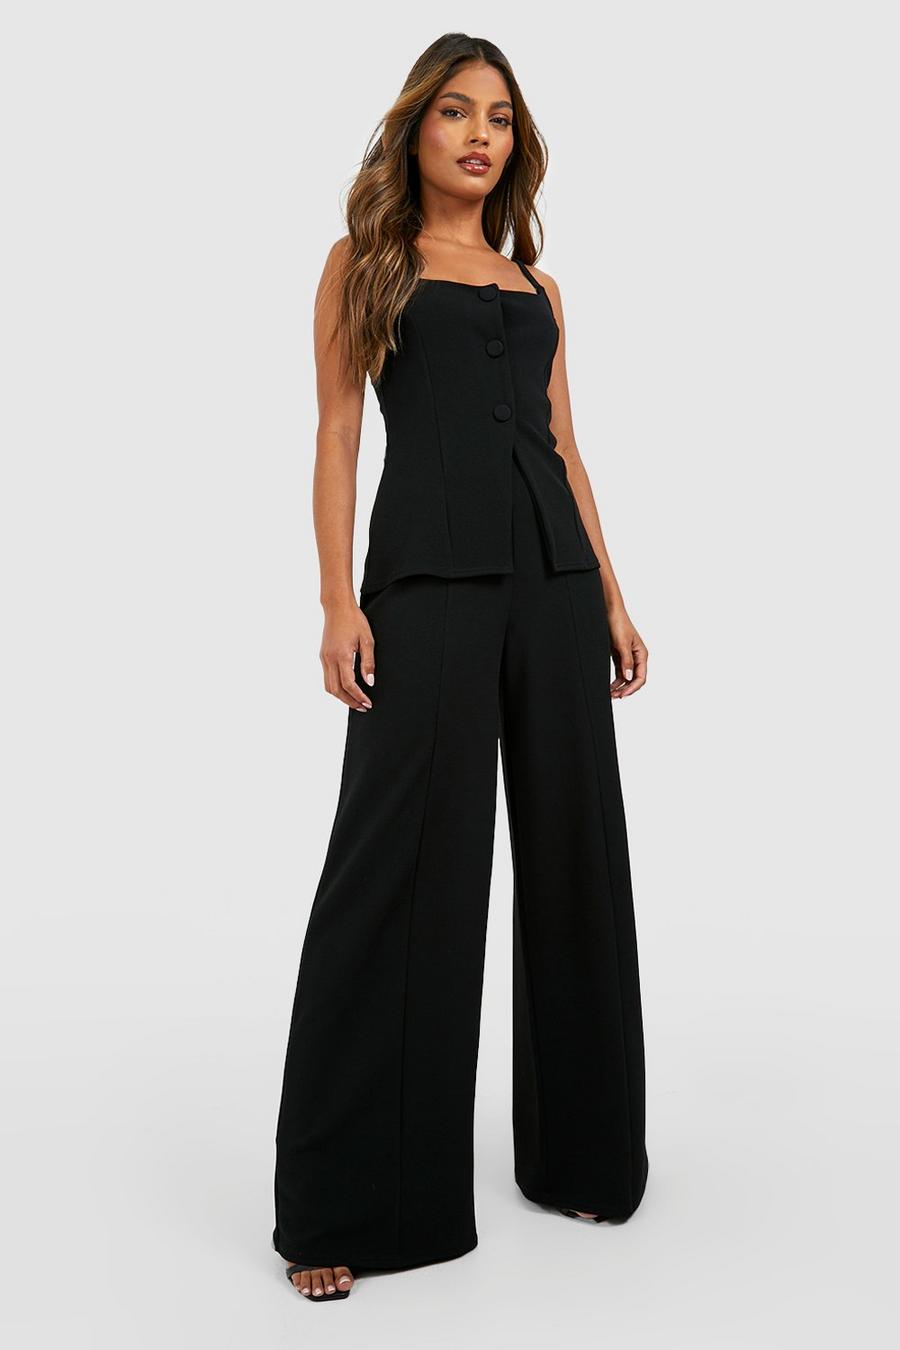 Flattering Wide Leg Pants for All Body Types